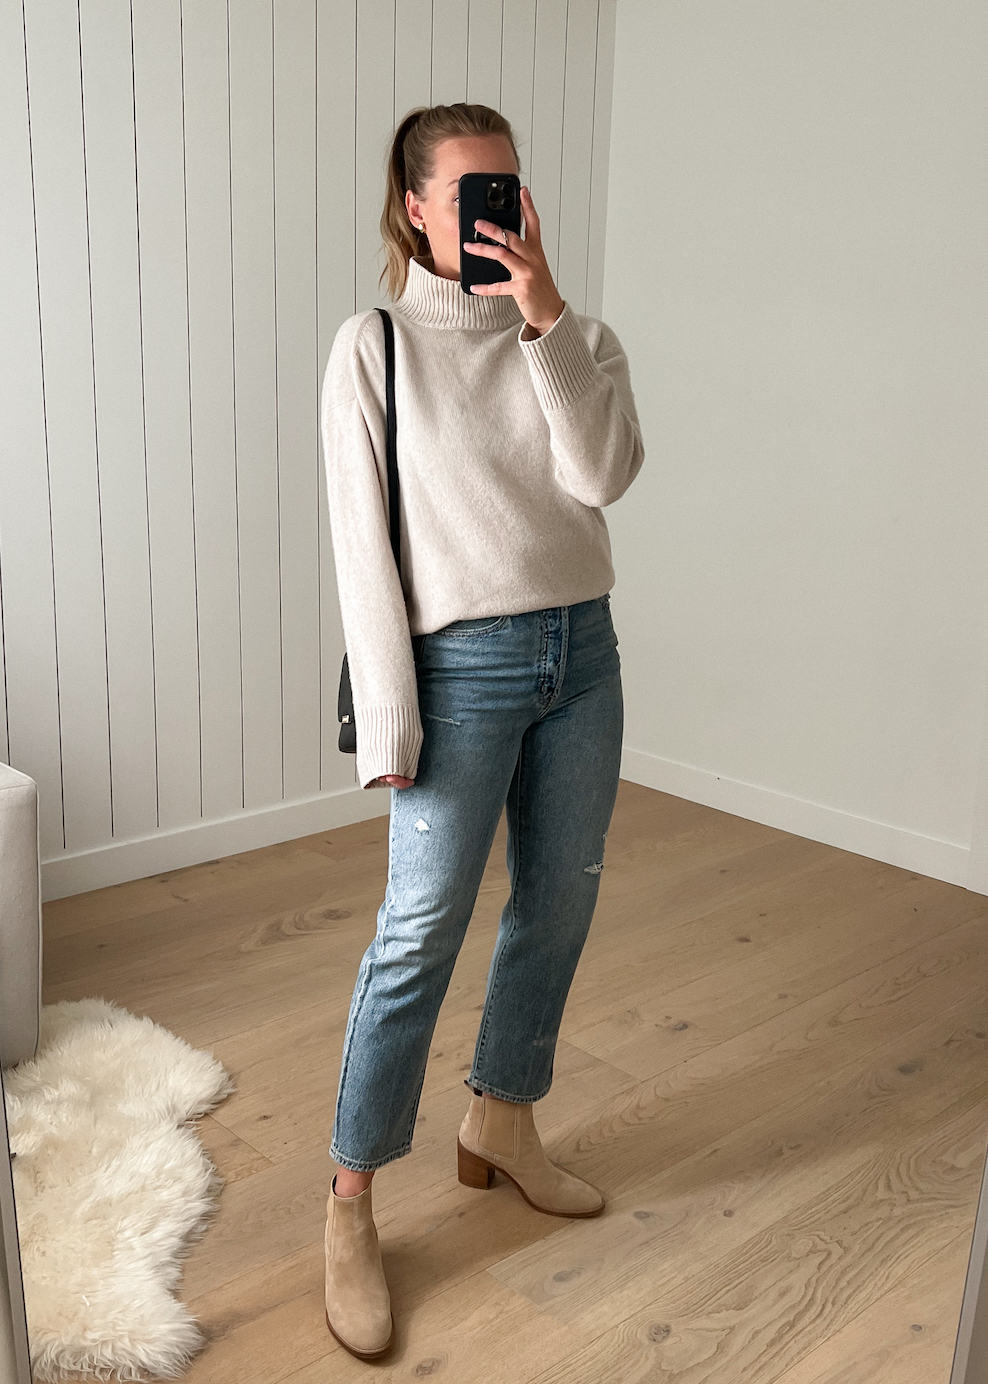 Woman wearing jeans, tan Chelsea boots and a cream turtleneck.